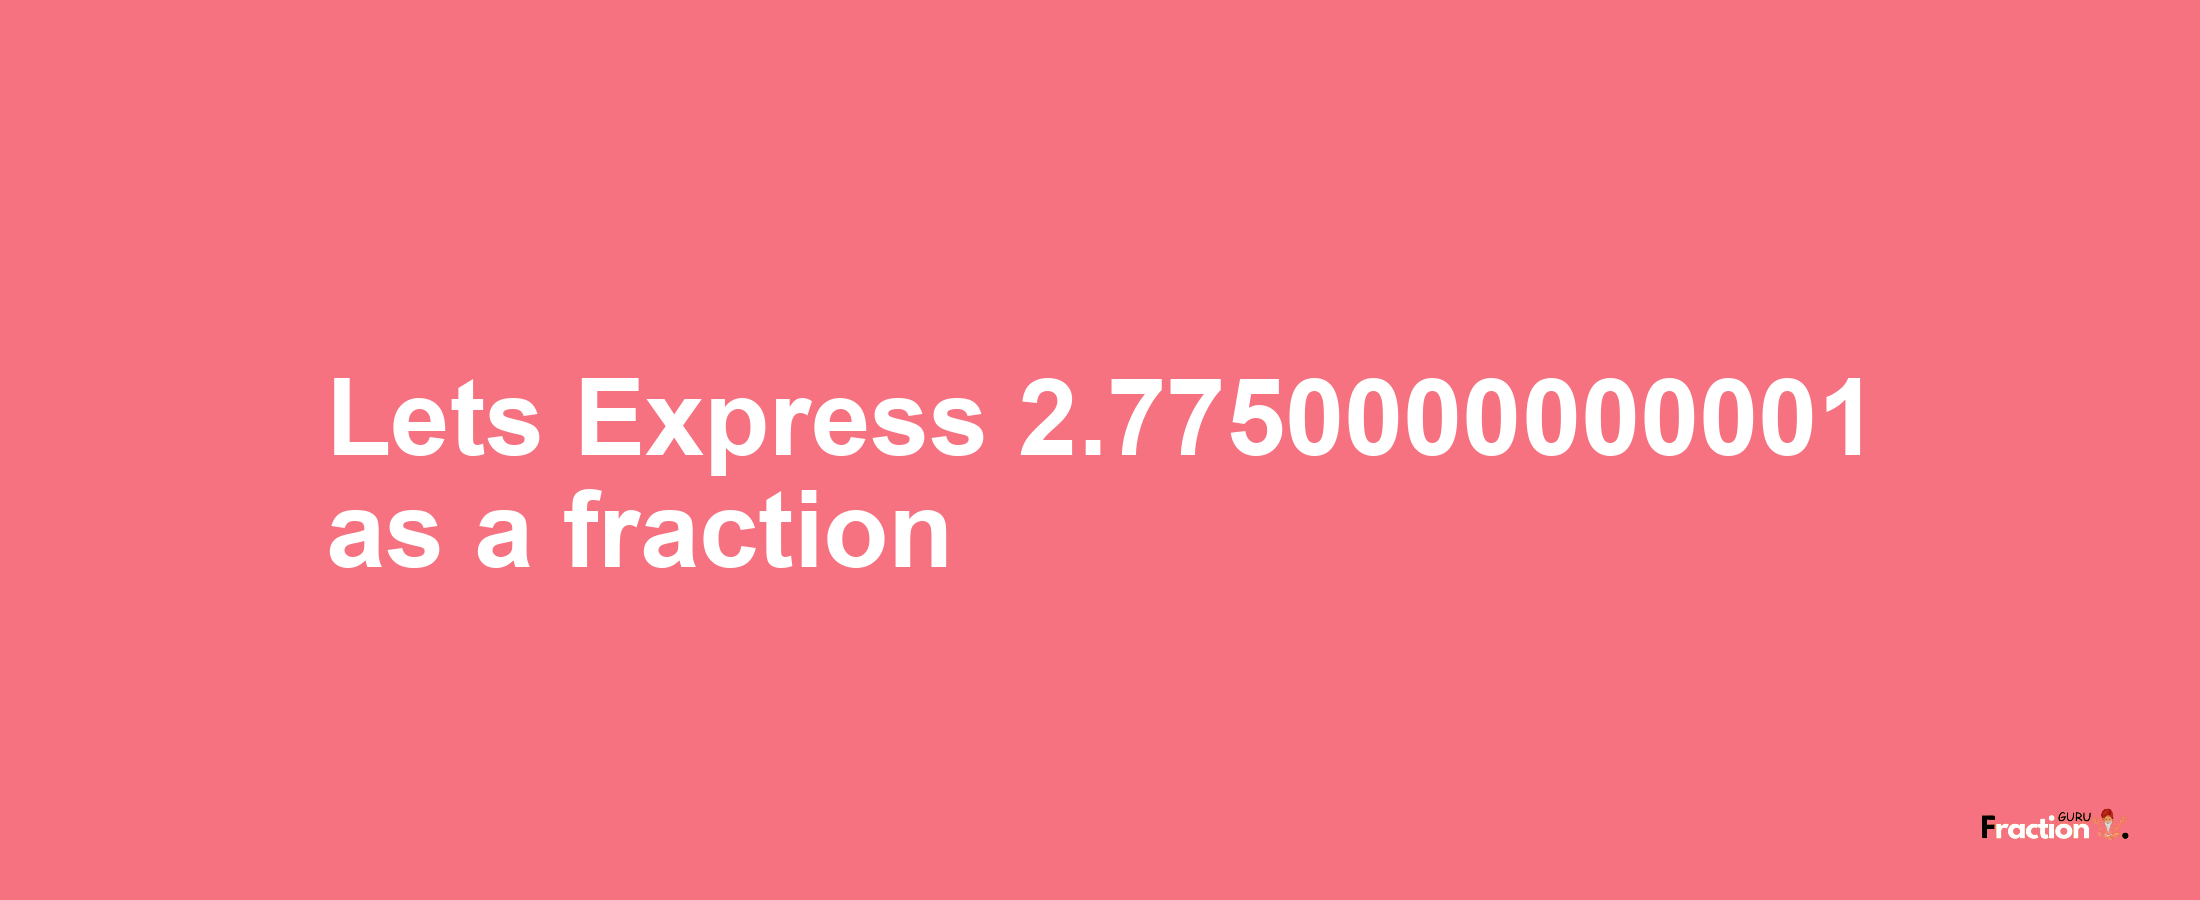 Lets Express 2.7750000000001 as afraction